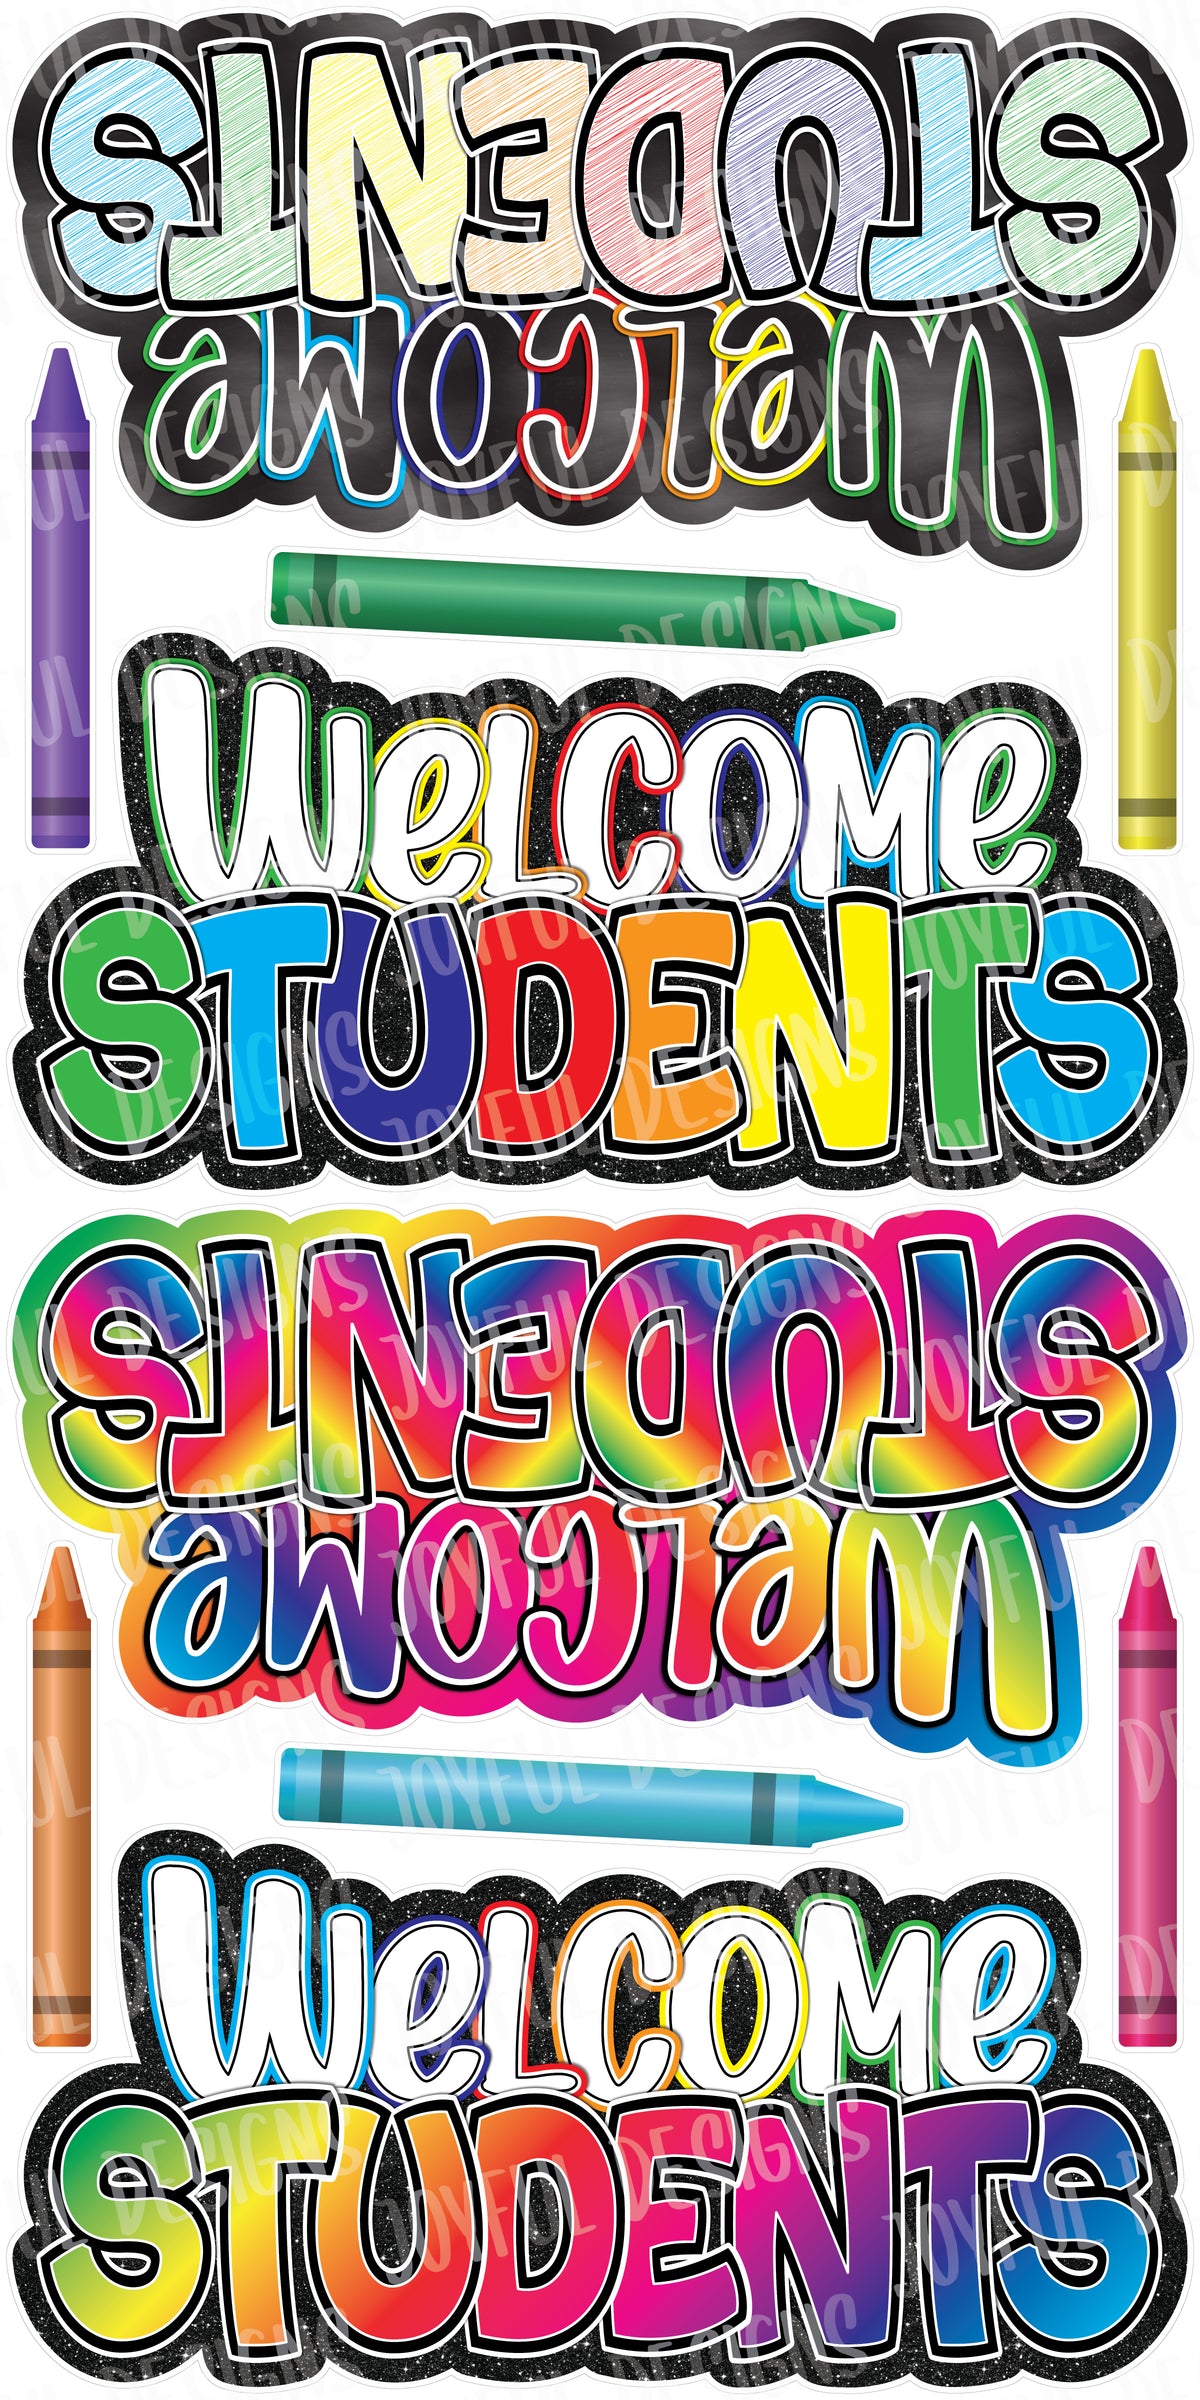 4 Welcome Students Centerpieces - Bouncy Font - With Backgrounds